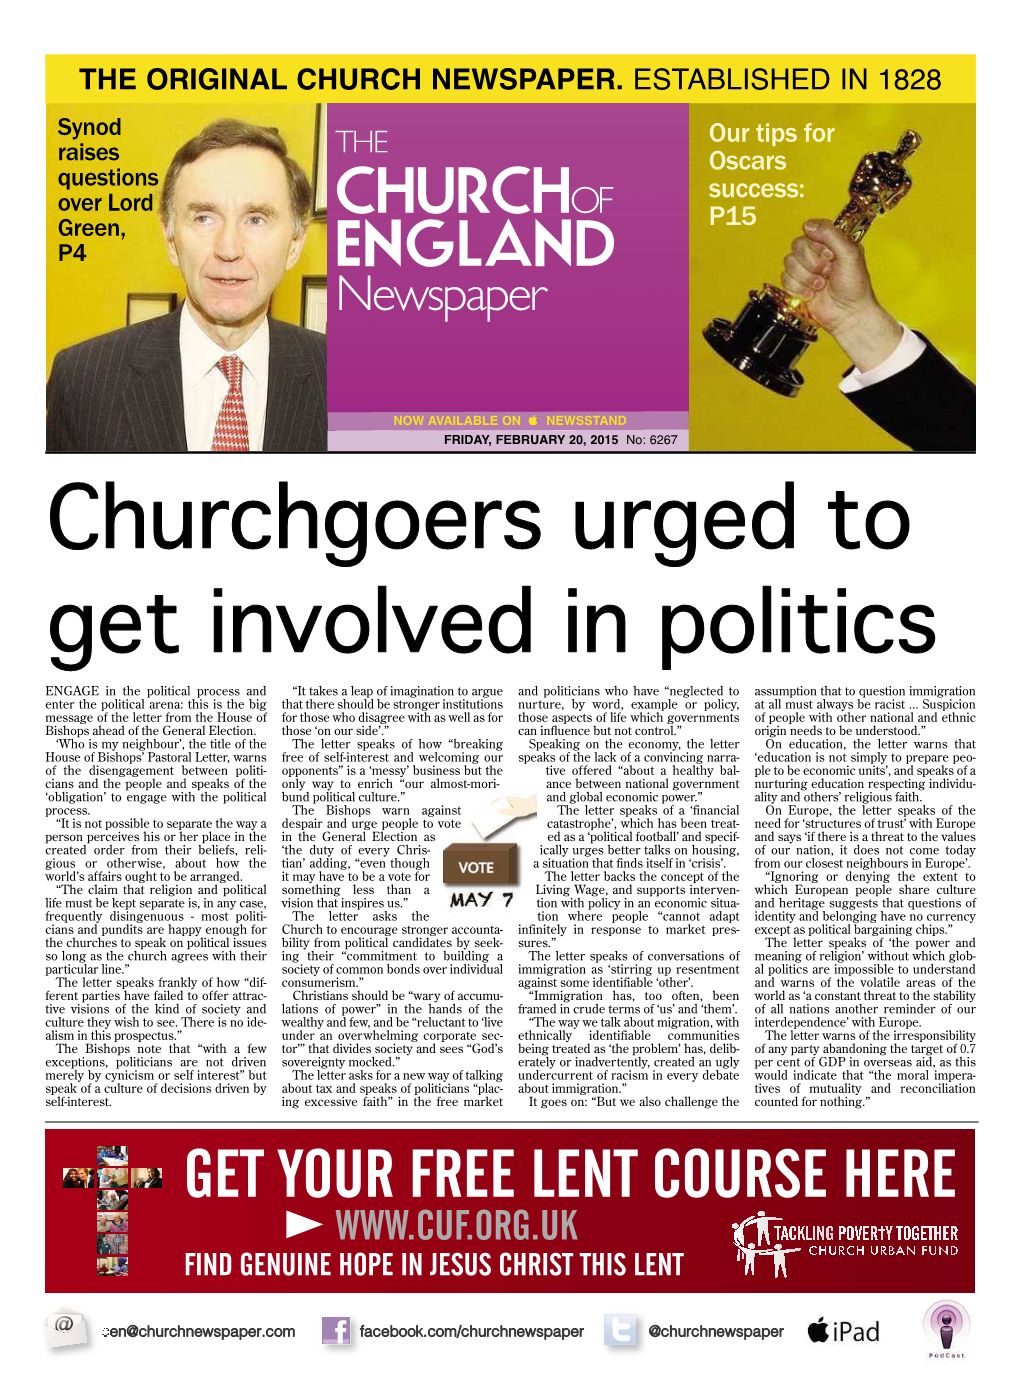 Churchgoers Urged to Get Involved in Politics